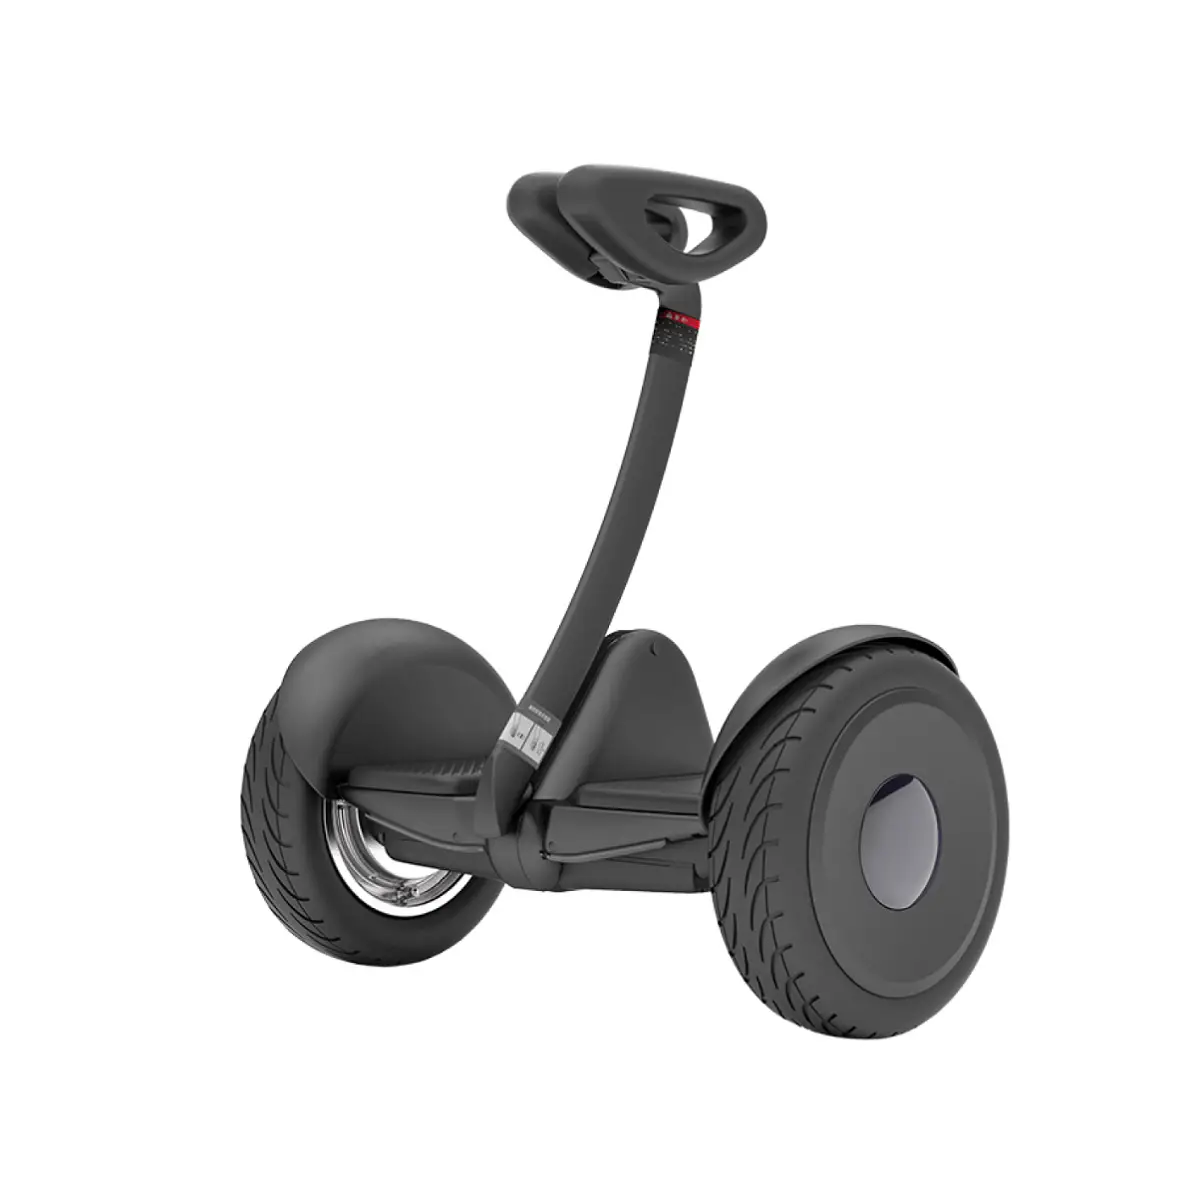 Segway Ninebot S adult ride-on toys